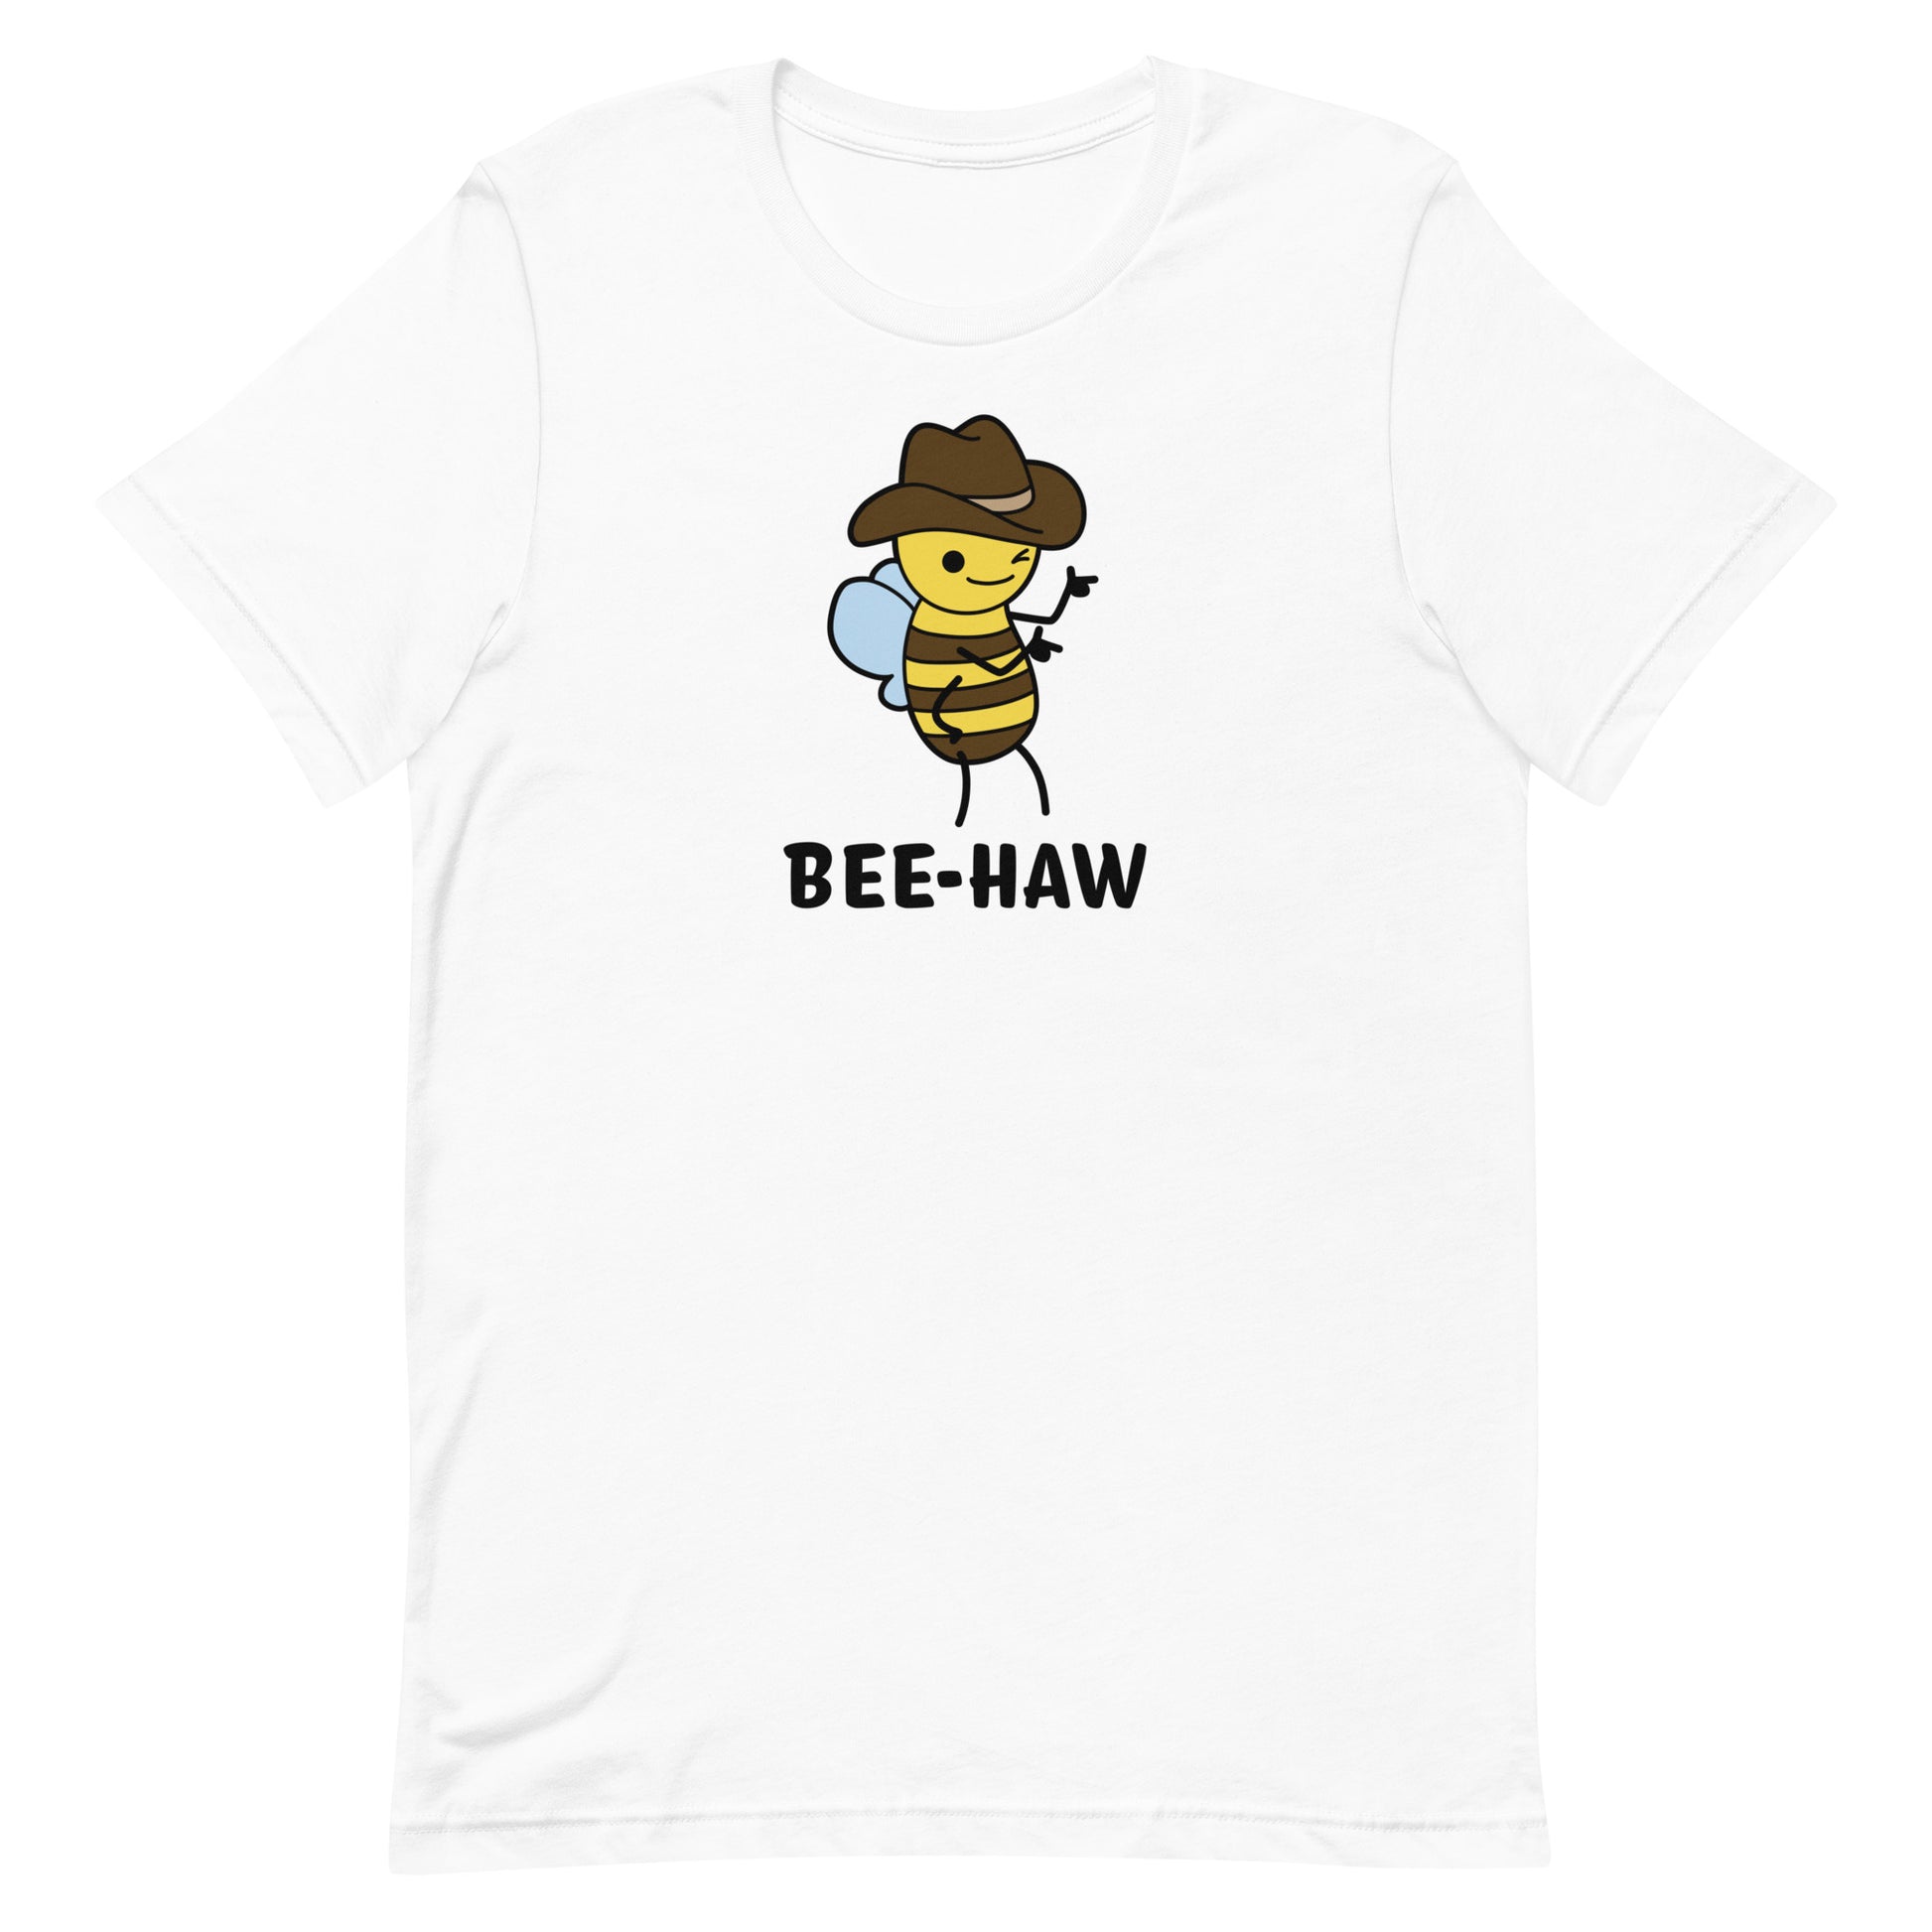 A white crewneck t-shirt with an image of a bee in a cowboy hat. The bee is winking and holding up "finger guns". Underneath the bee is text reading "Bee-Haw"